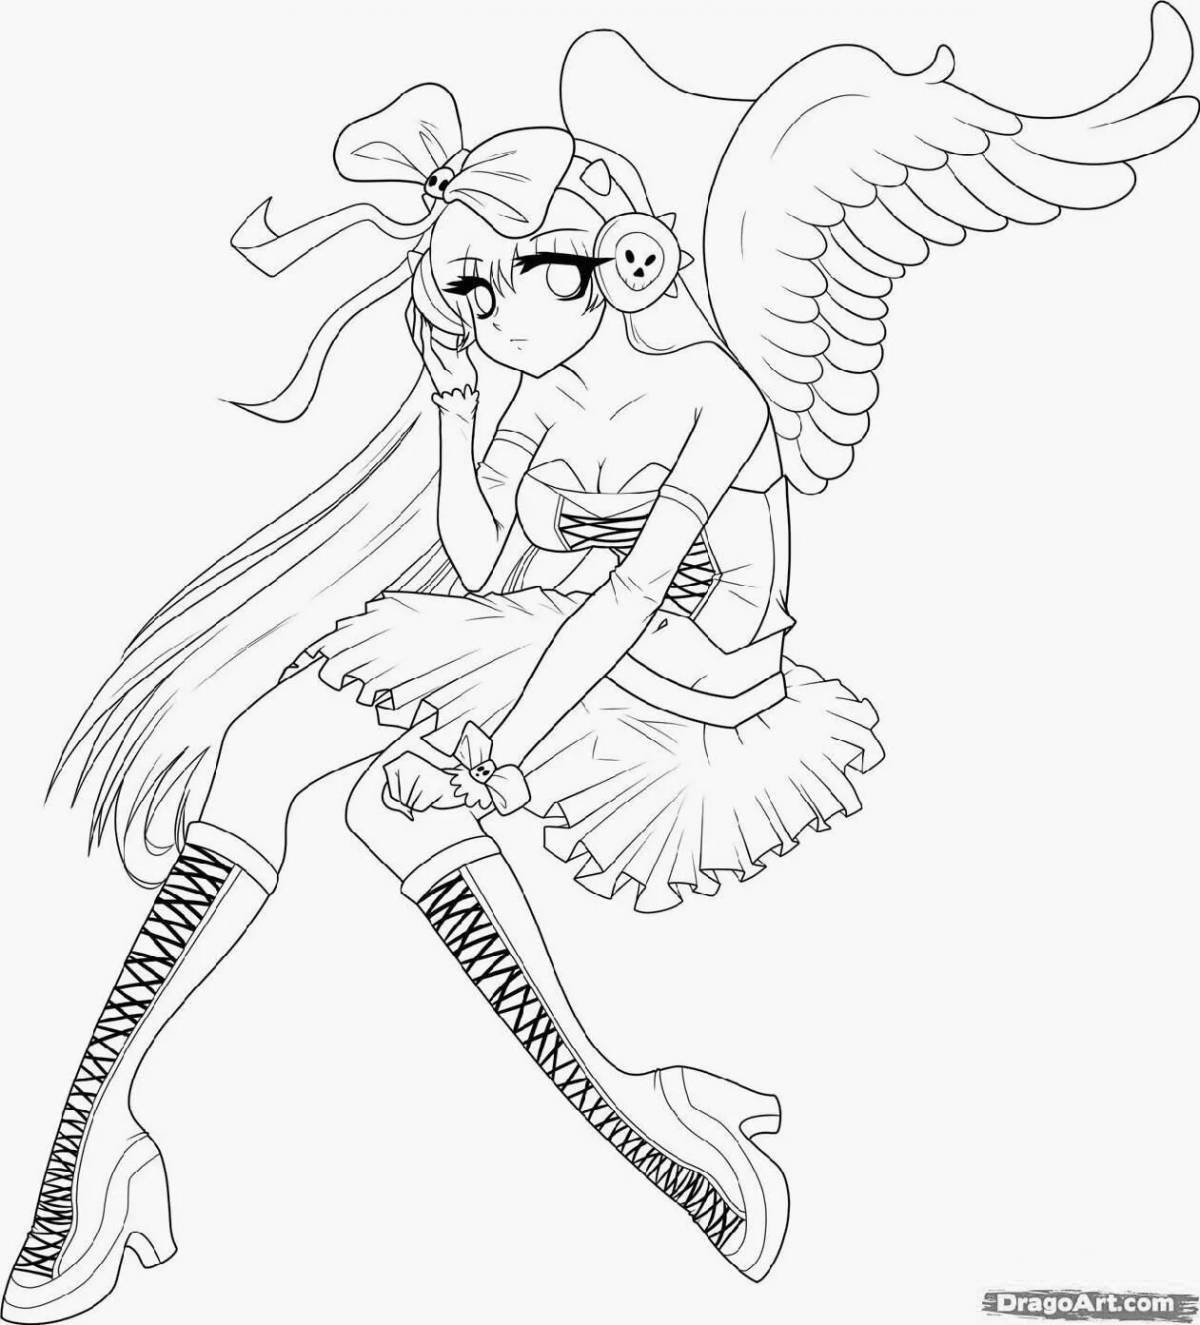 Fun coloring anime with wings